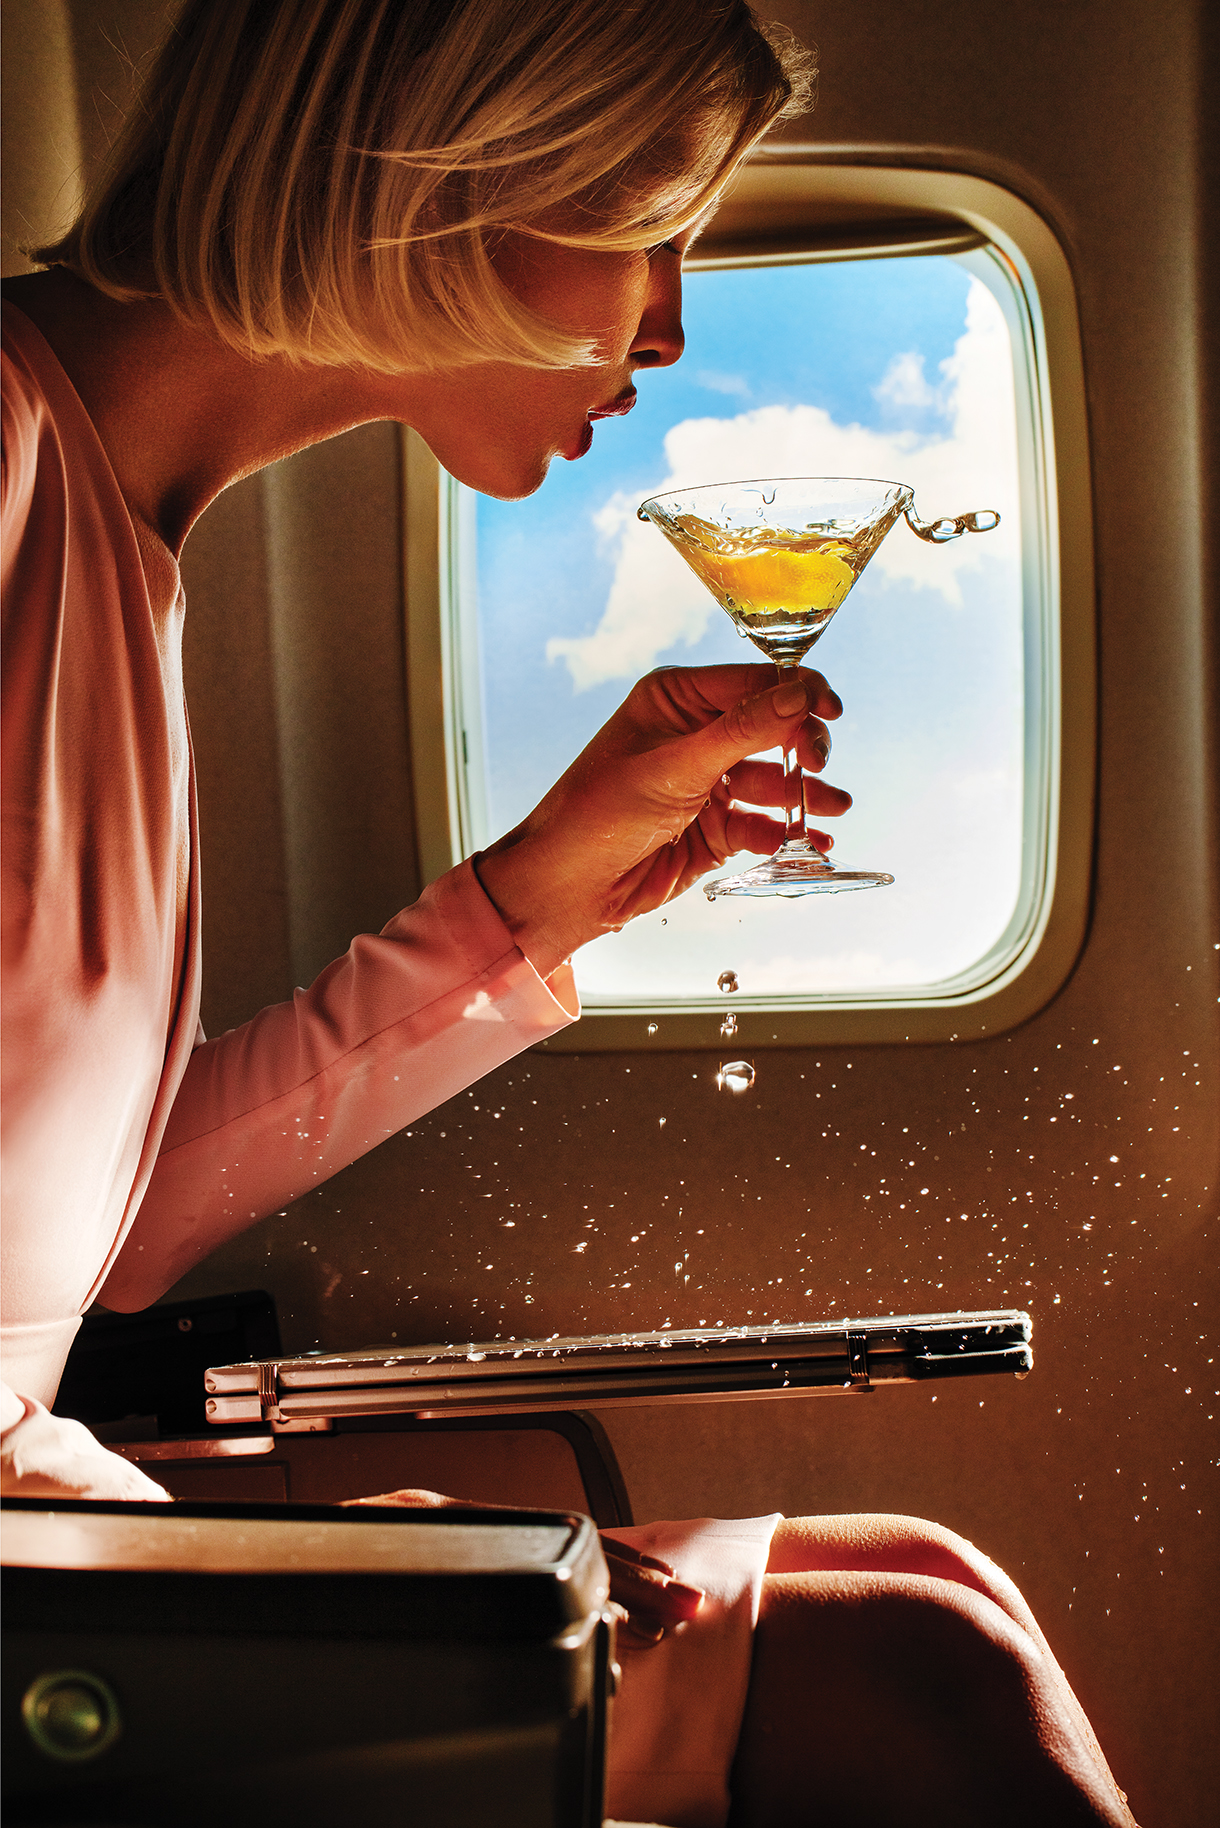 Woman drinking a martini on an airplane during turbulence